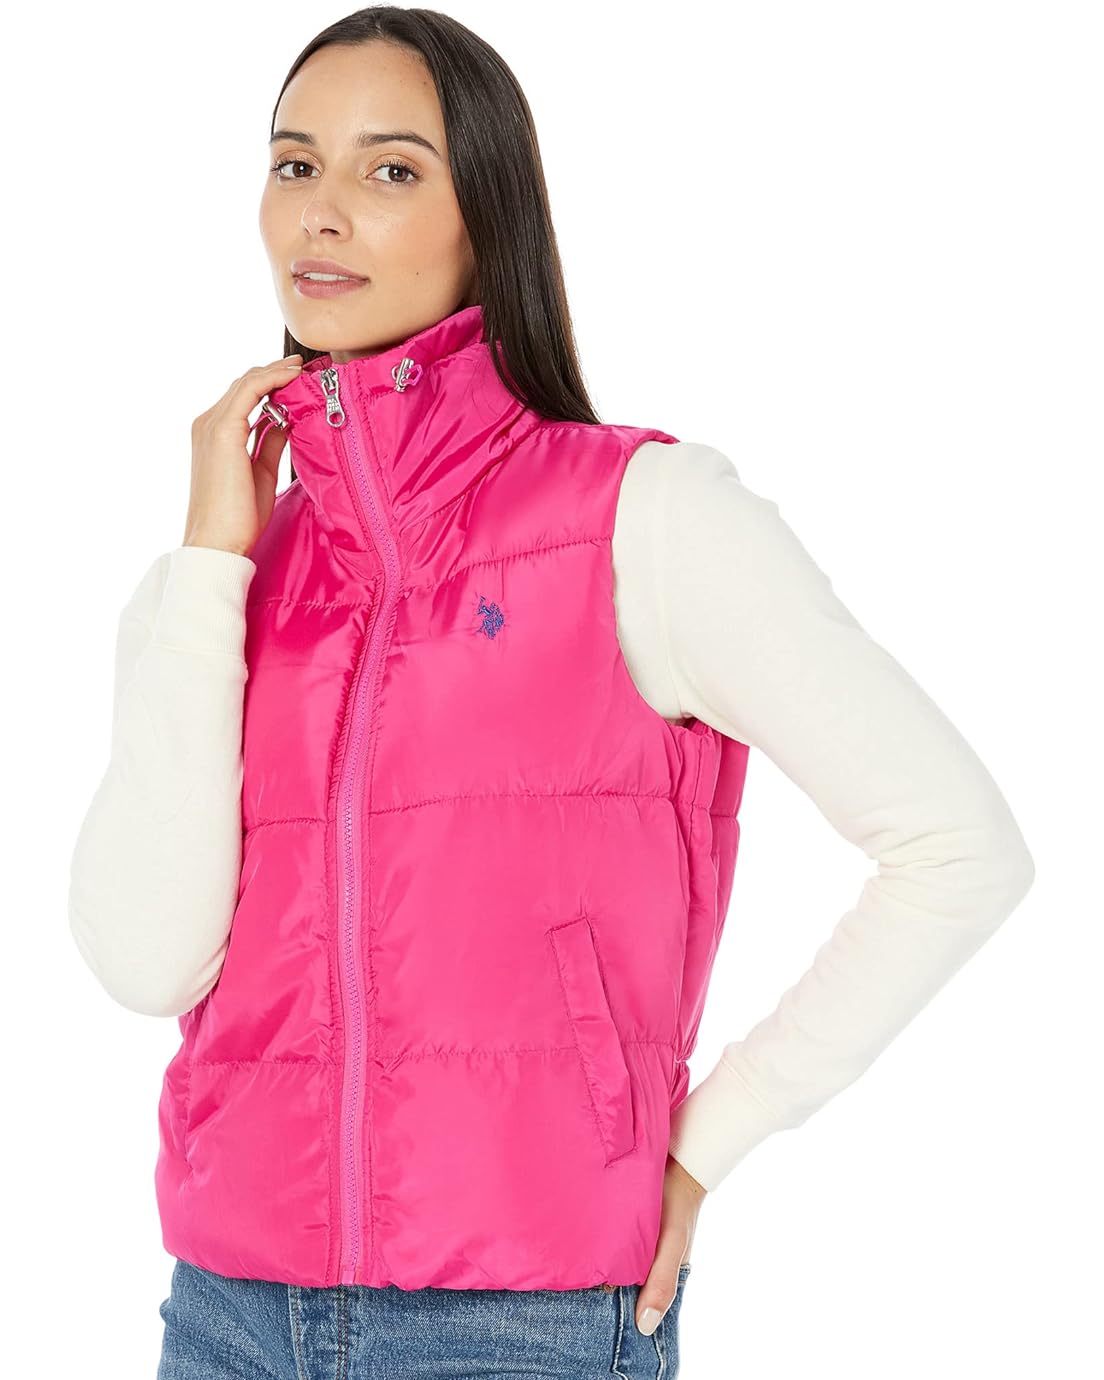 U.S. POLO ASSN. Cropped Puffer Vest